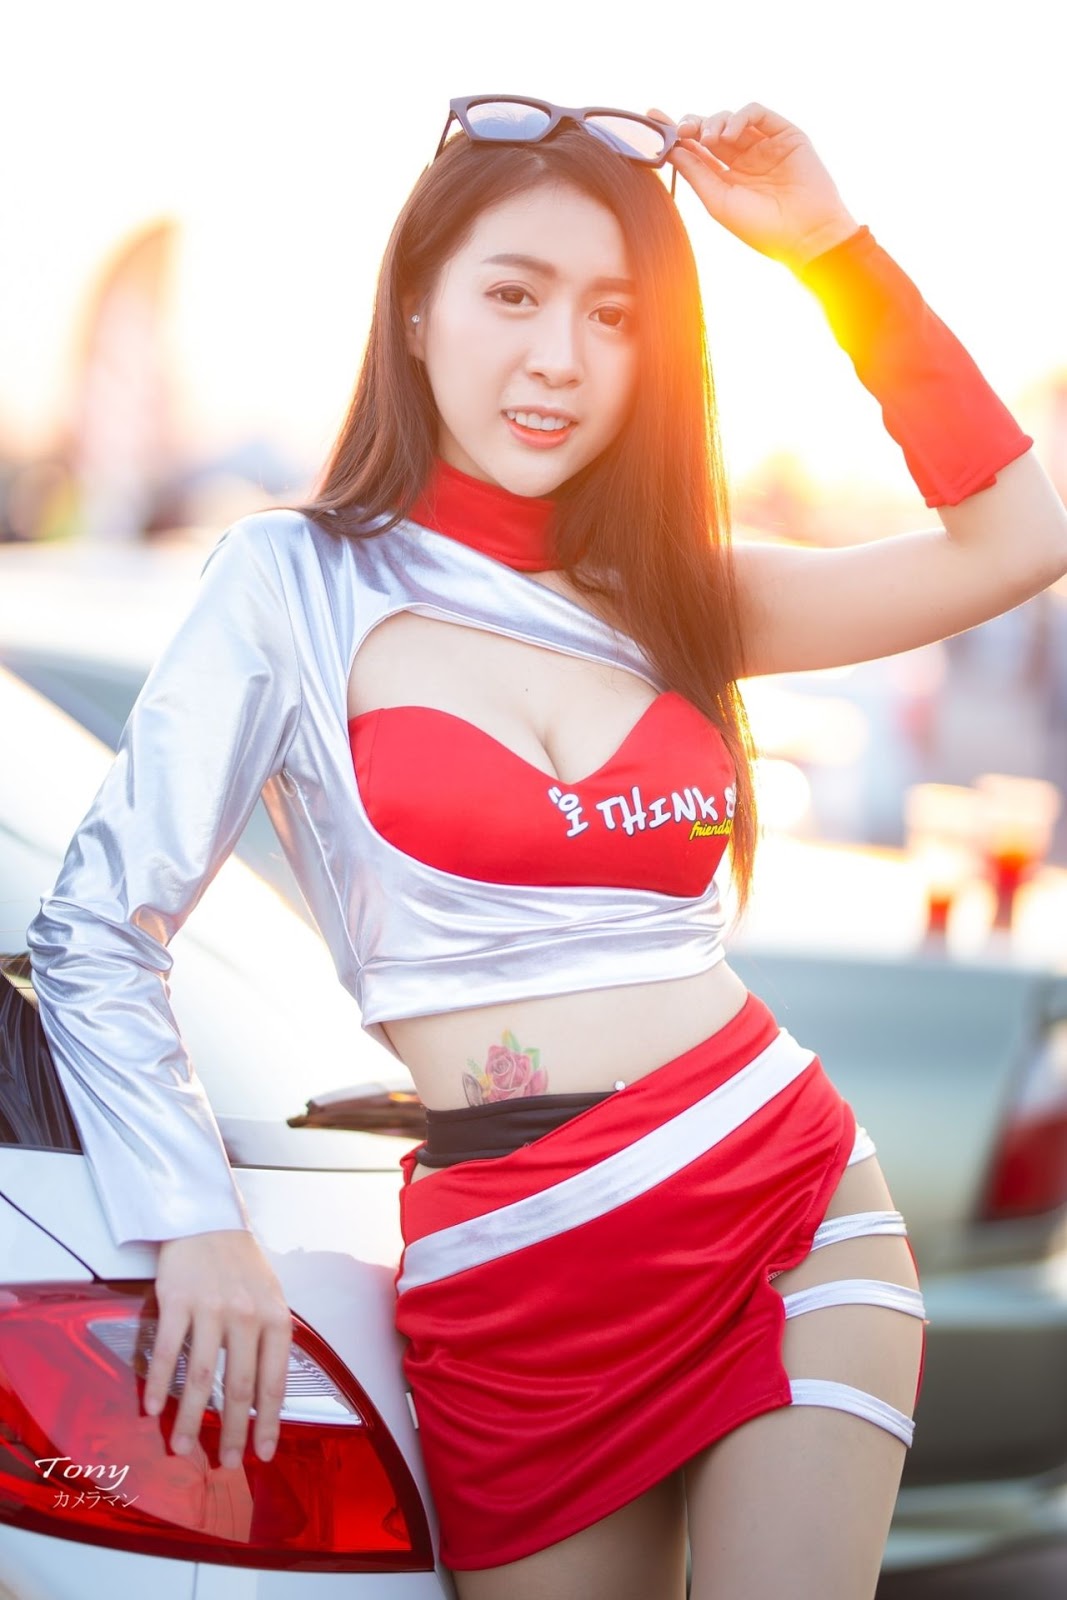 Image-Thailand-Hot-Model-Thai-Racing-Girl-At-Pathum-Thani-Speedway-TruePic.net- Picture-41